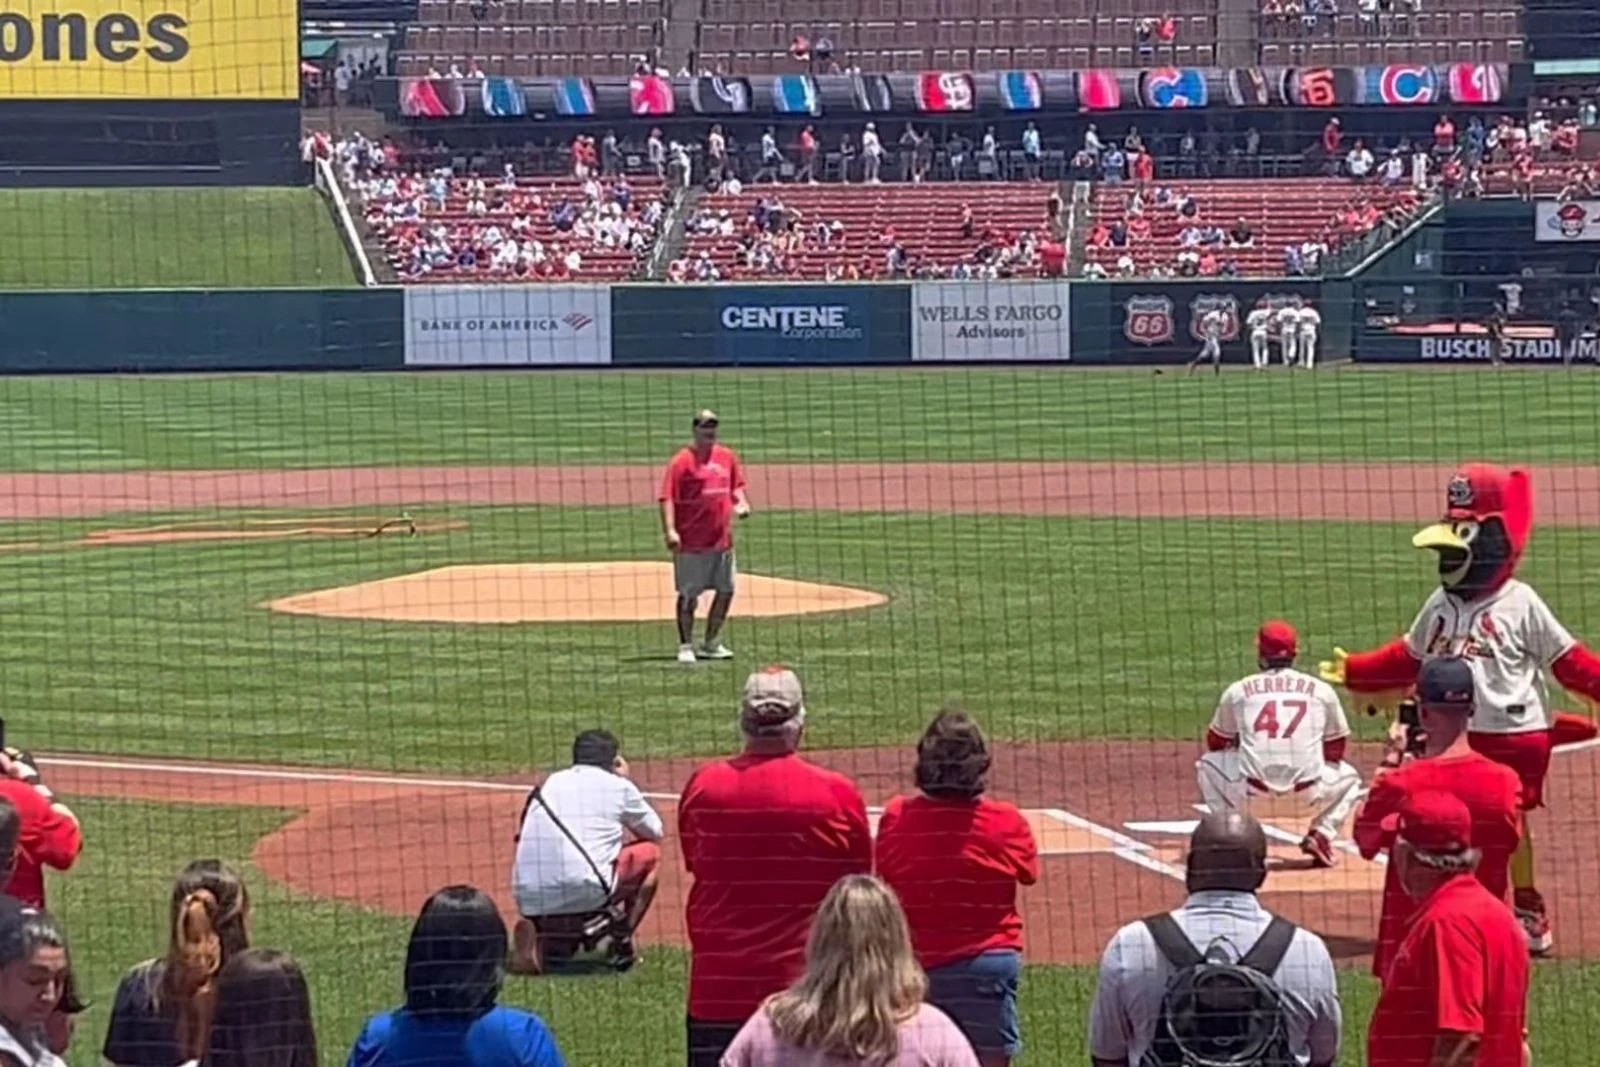 Larry Doby Jr. throws out the ceremonial first pitch before a